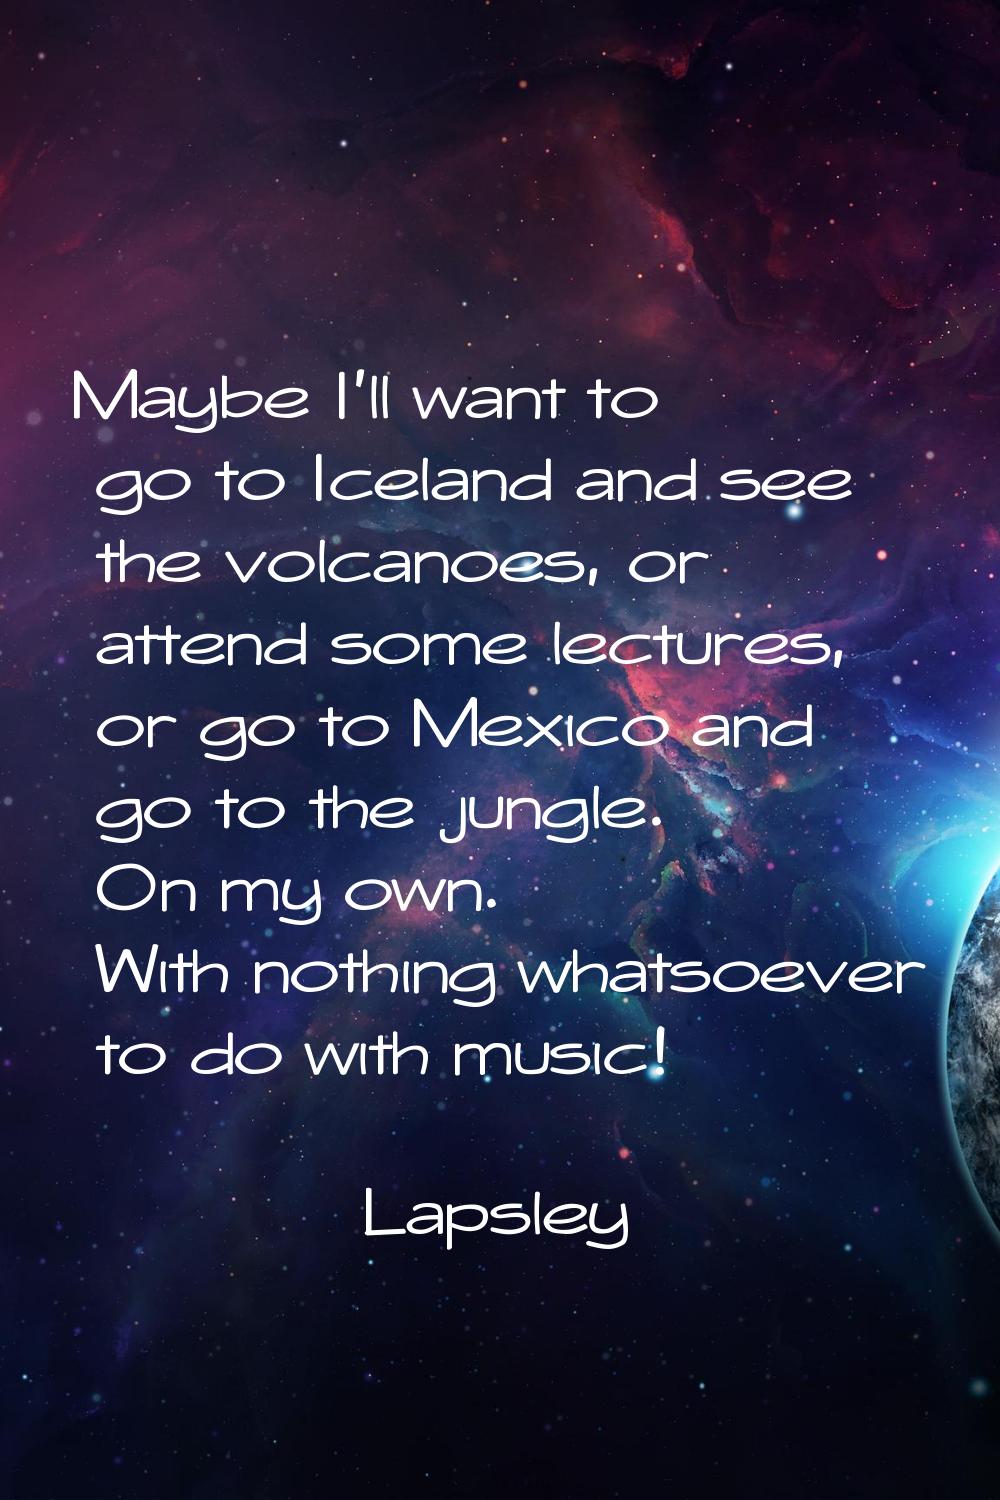 Maybe I'll want to go to Iceland and see the volcanoes, or attend some lectures, or go to Mexico an